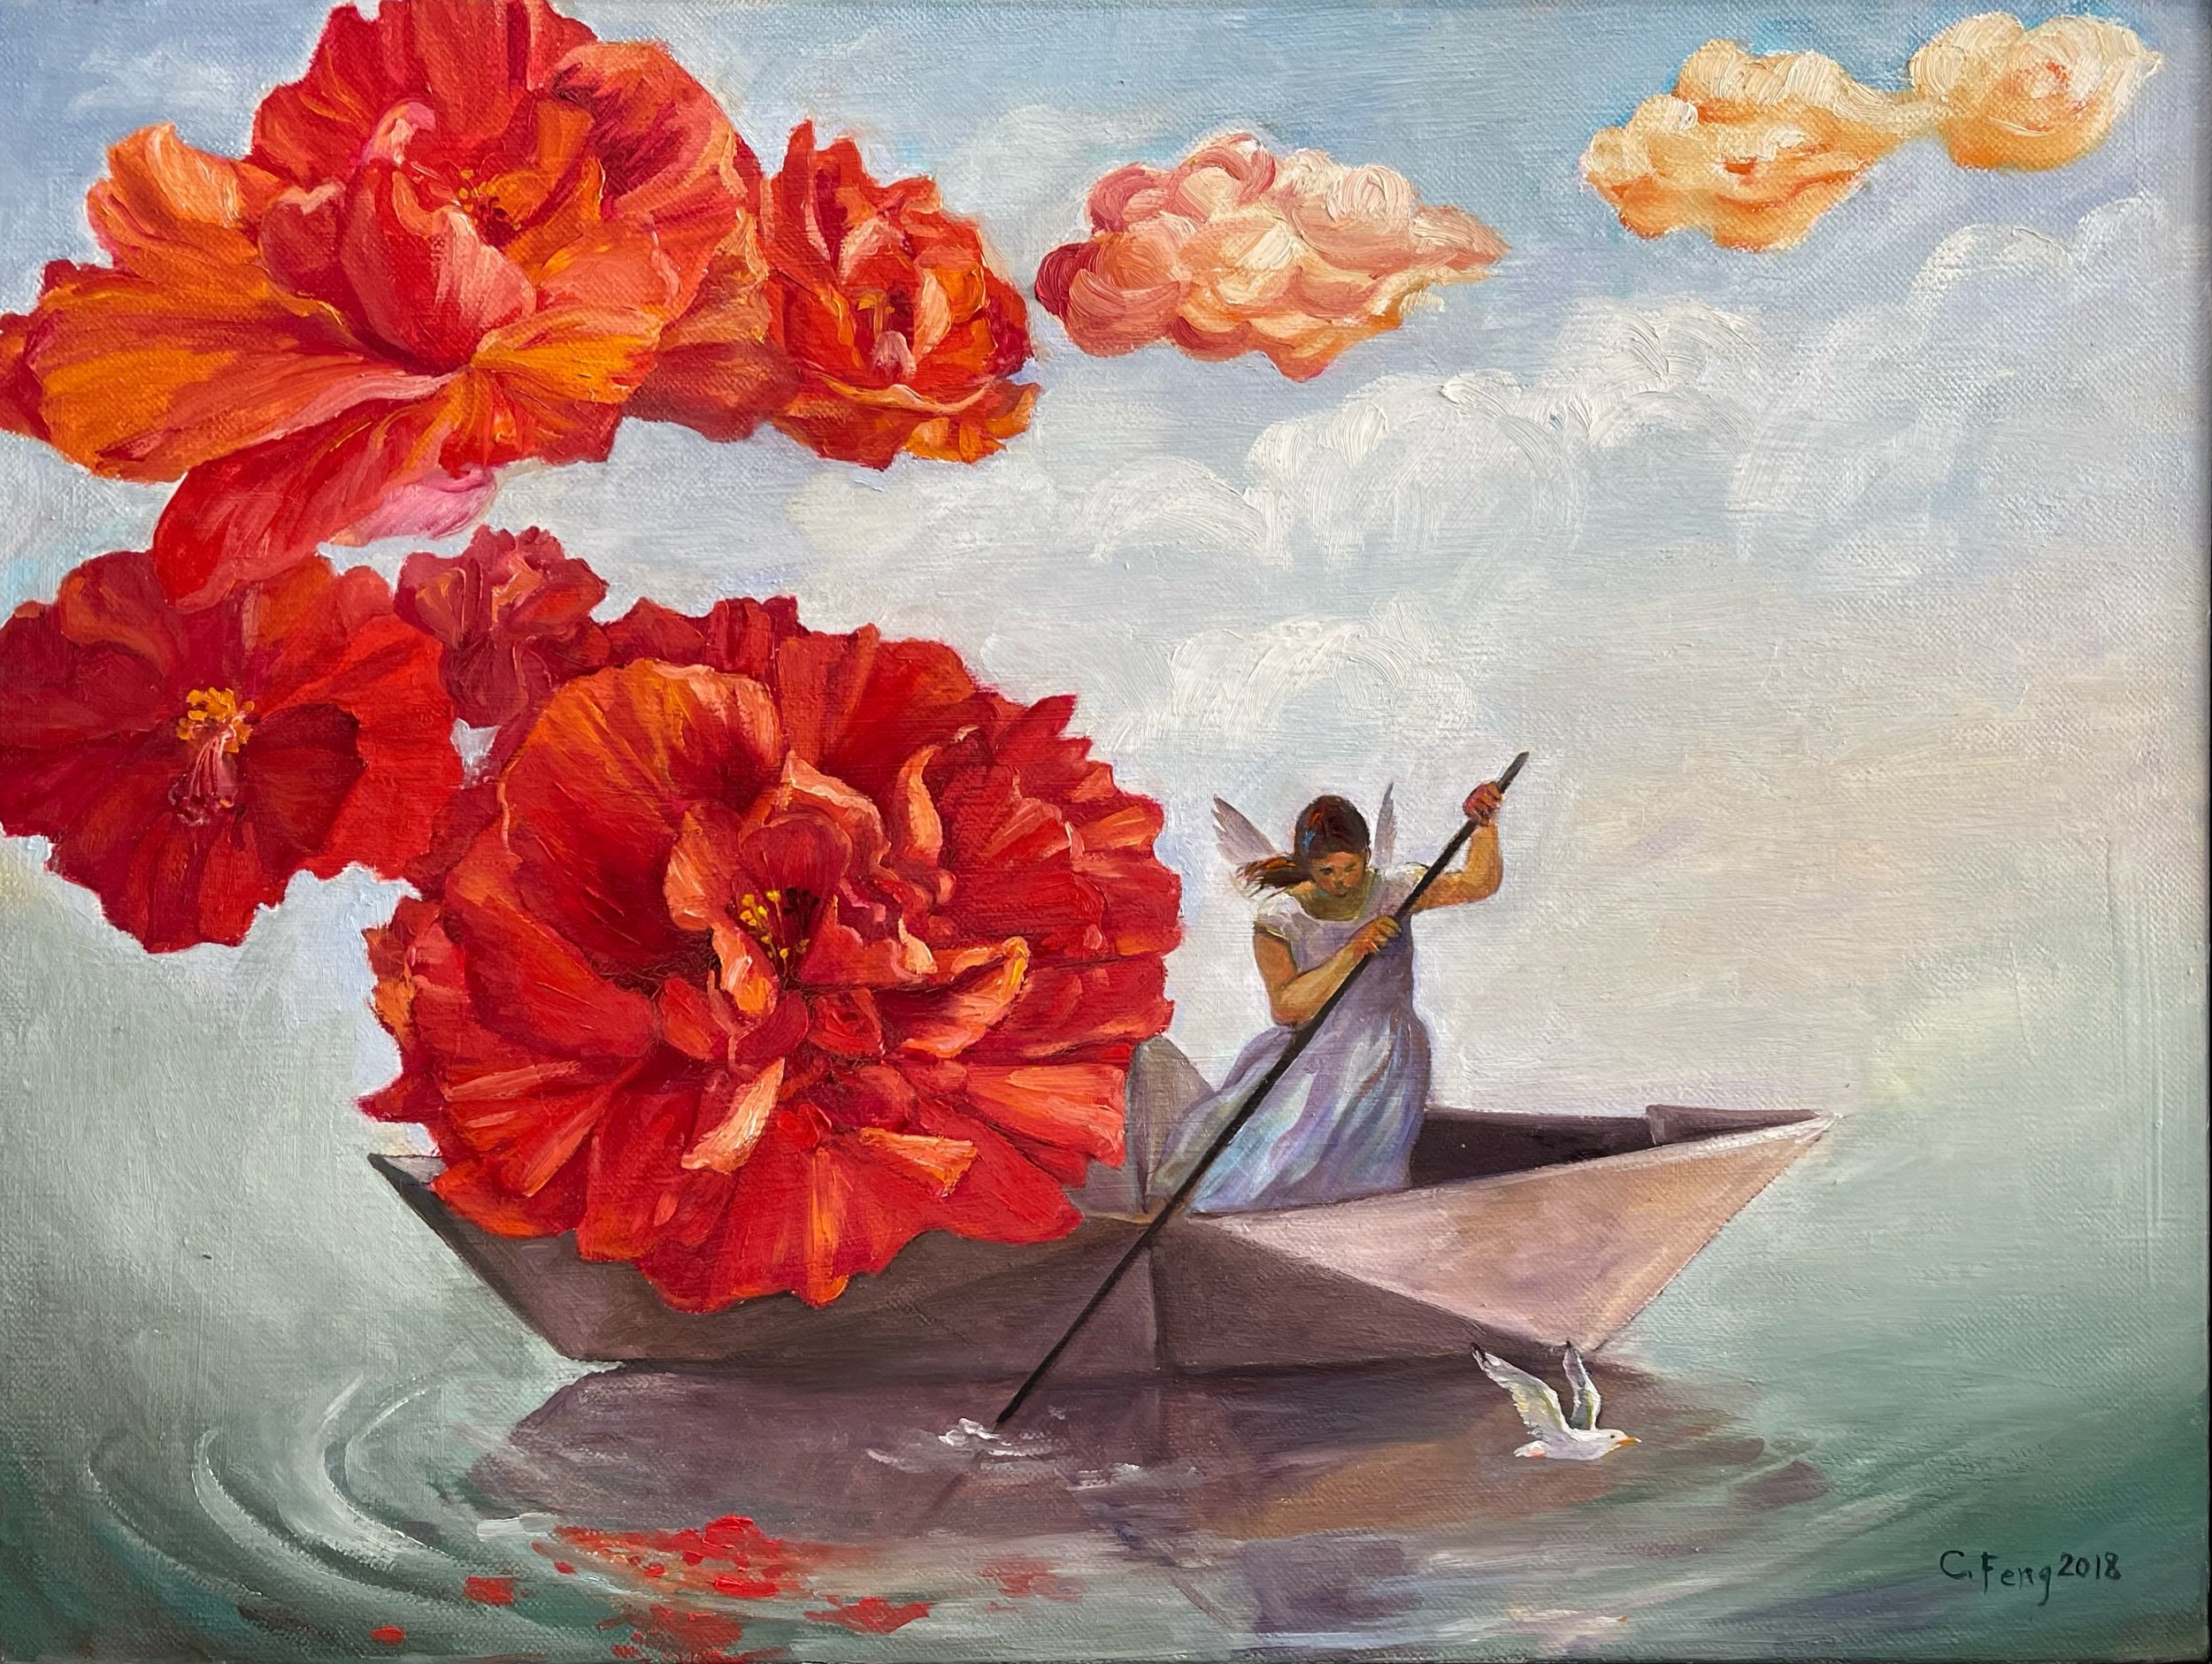 Rowing to the Beyond/80x60cm/oil on canvas/2022